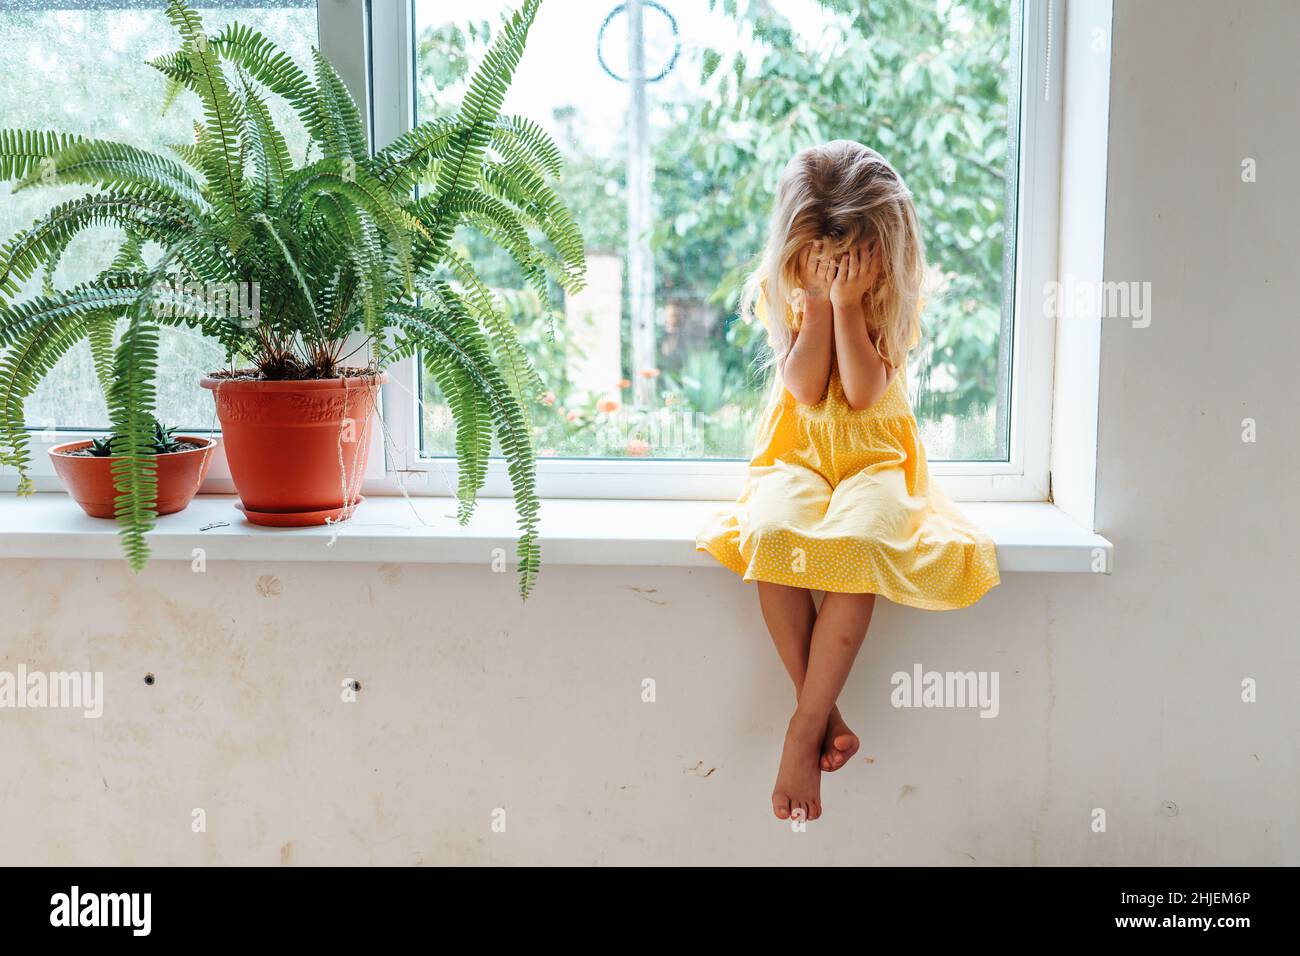 Young little crying girl barefoot sitting on window sill face in hands near plants. Desperate child. Side view.  Stock Photo